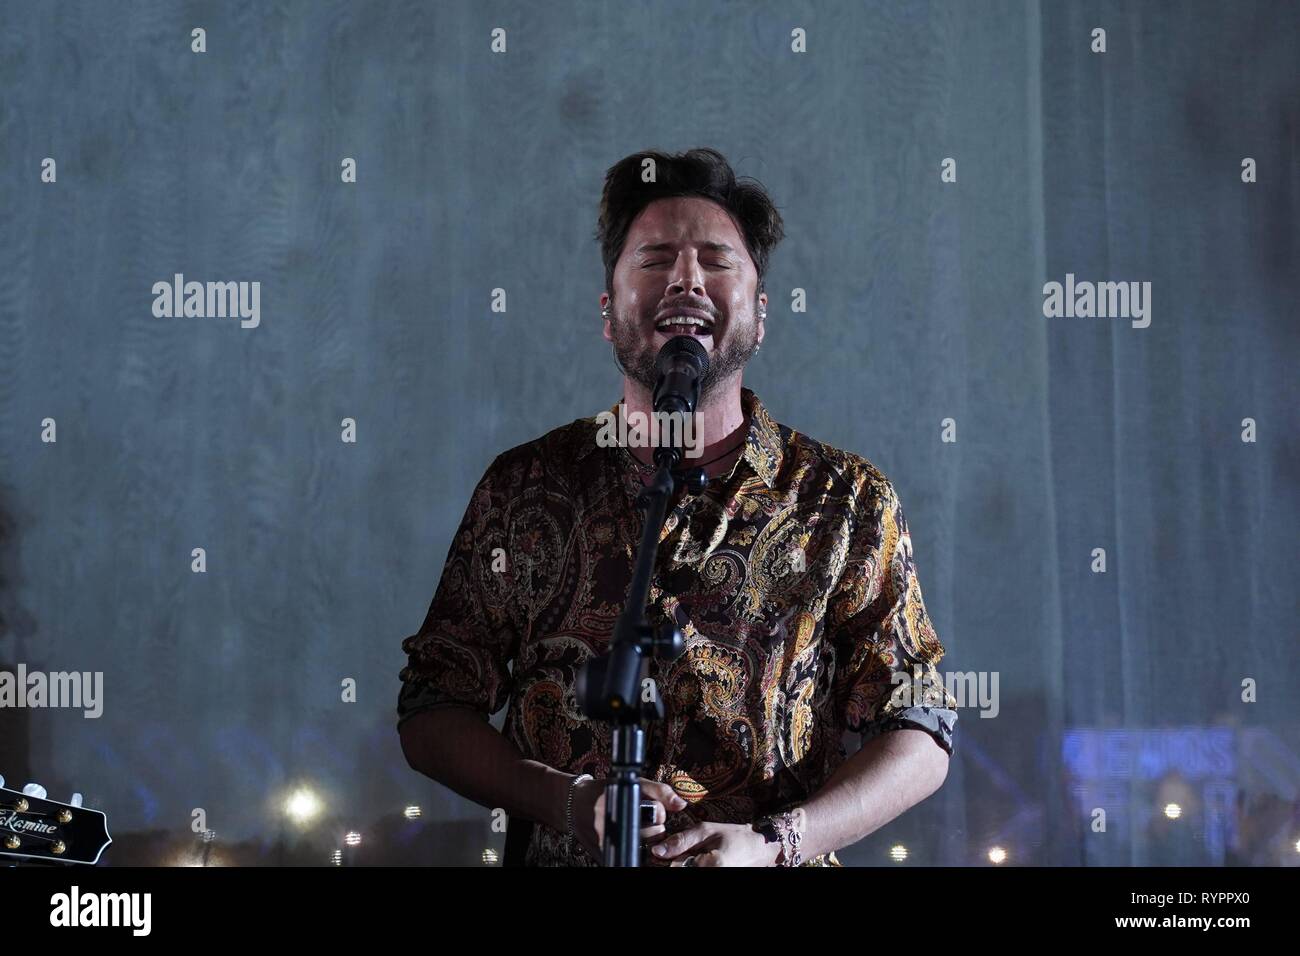 Tenerife, Spain. 14th Mar, 2019. Manuel Carrasco during 23 edition of the Cadena Dial Awards in Tenerife Thursday March 14, 2019. Credit: CORDON PRESS/Alamy Live News Stock Photo